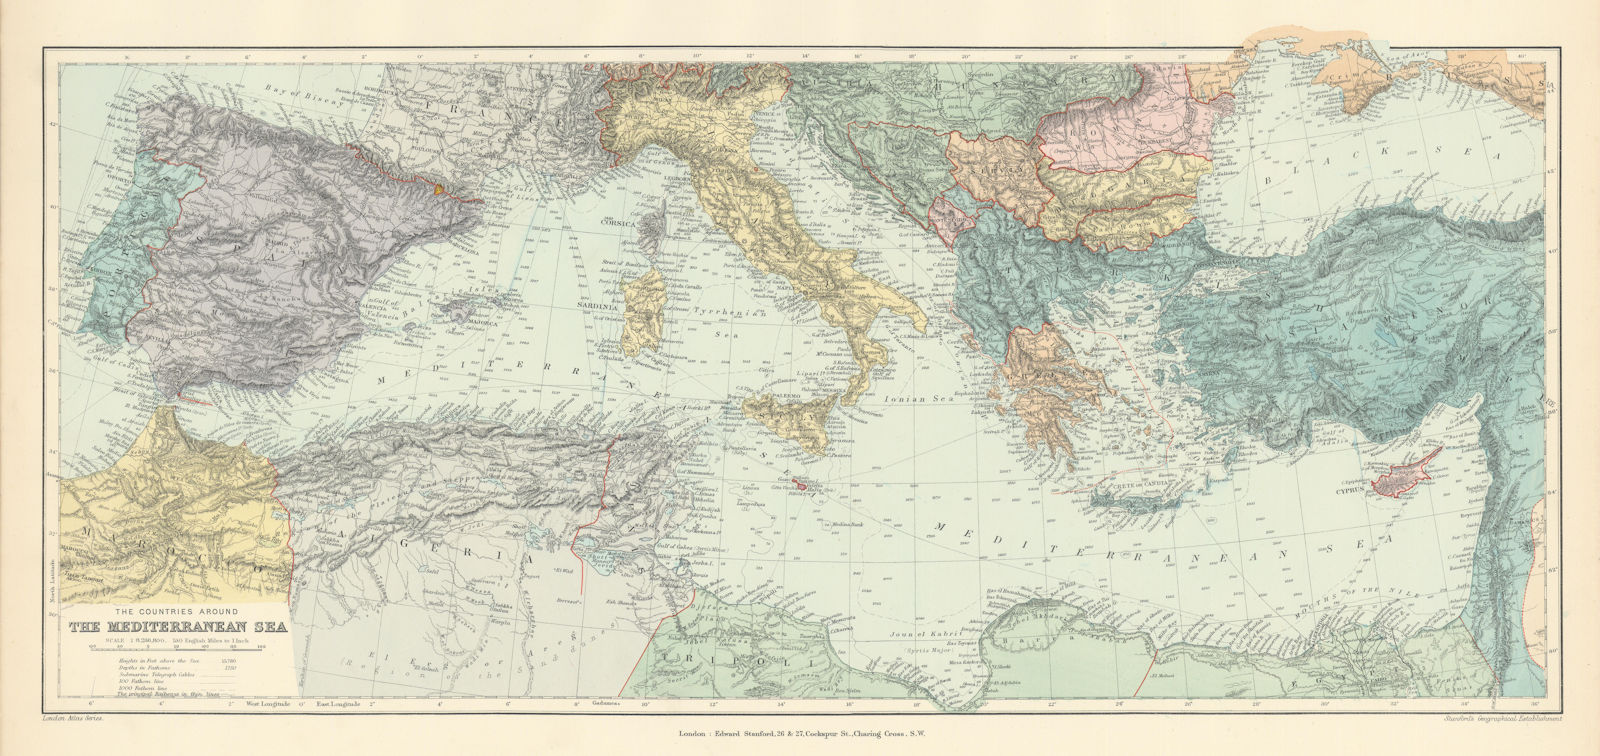 Countries round the Mediterranean. Soundings Telegraph cables. STANFORD 1896 map